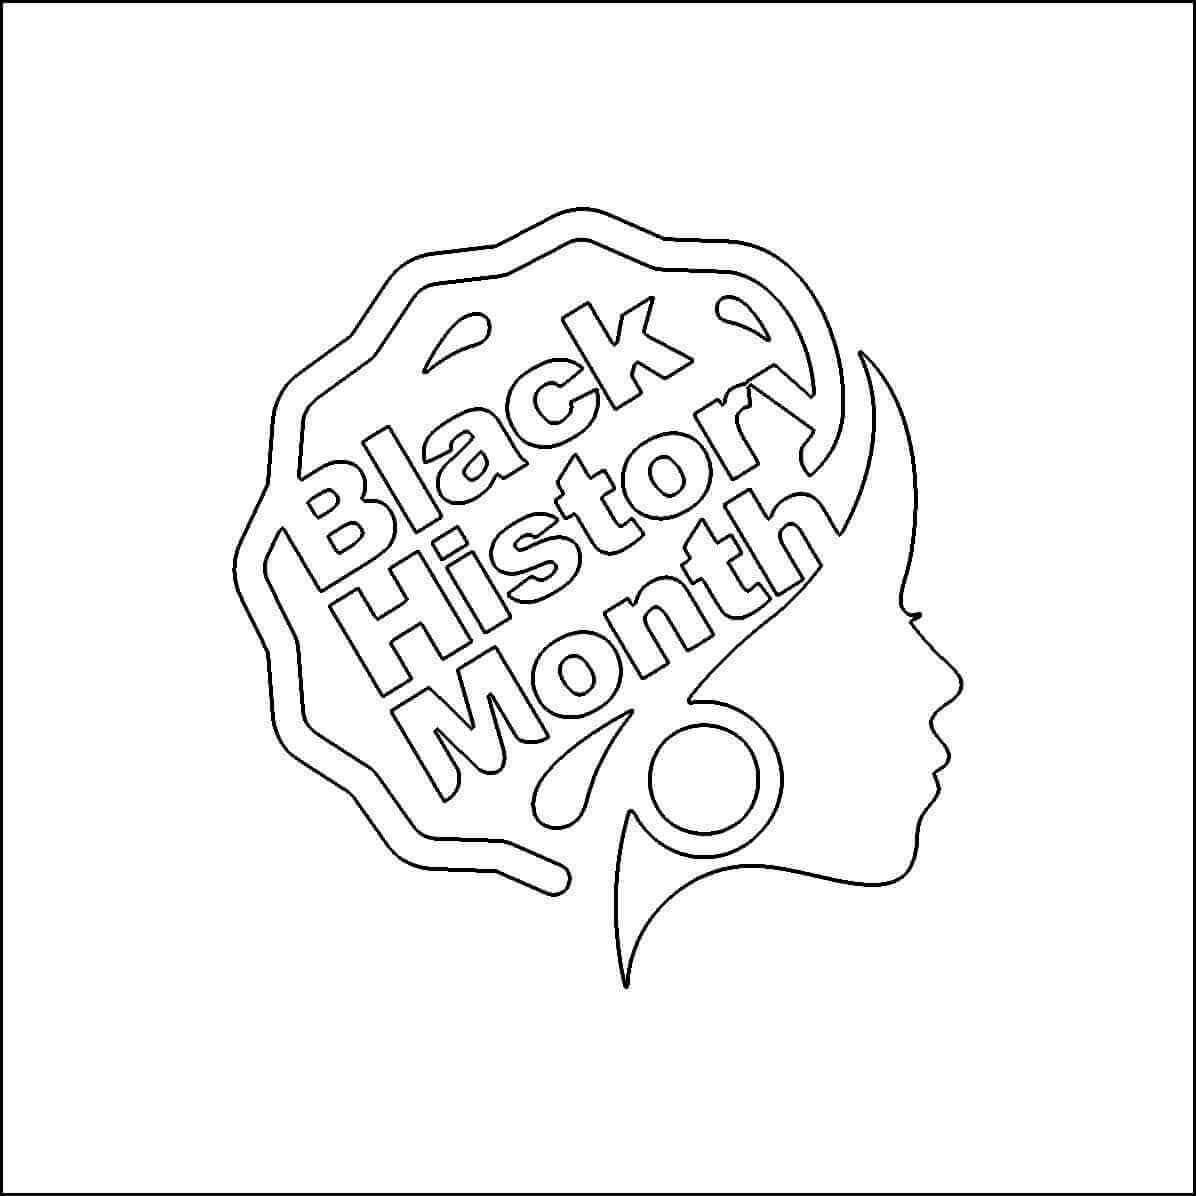 Black History Month 2021 coloring page printable